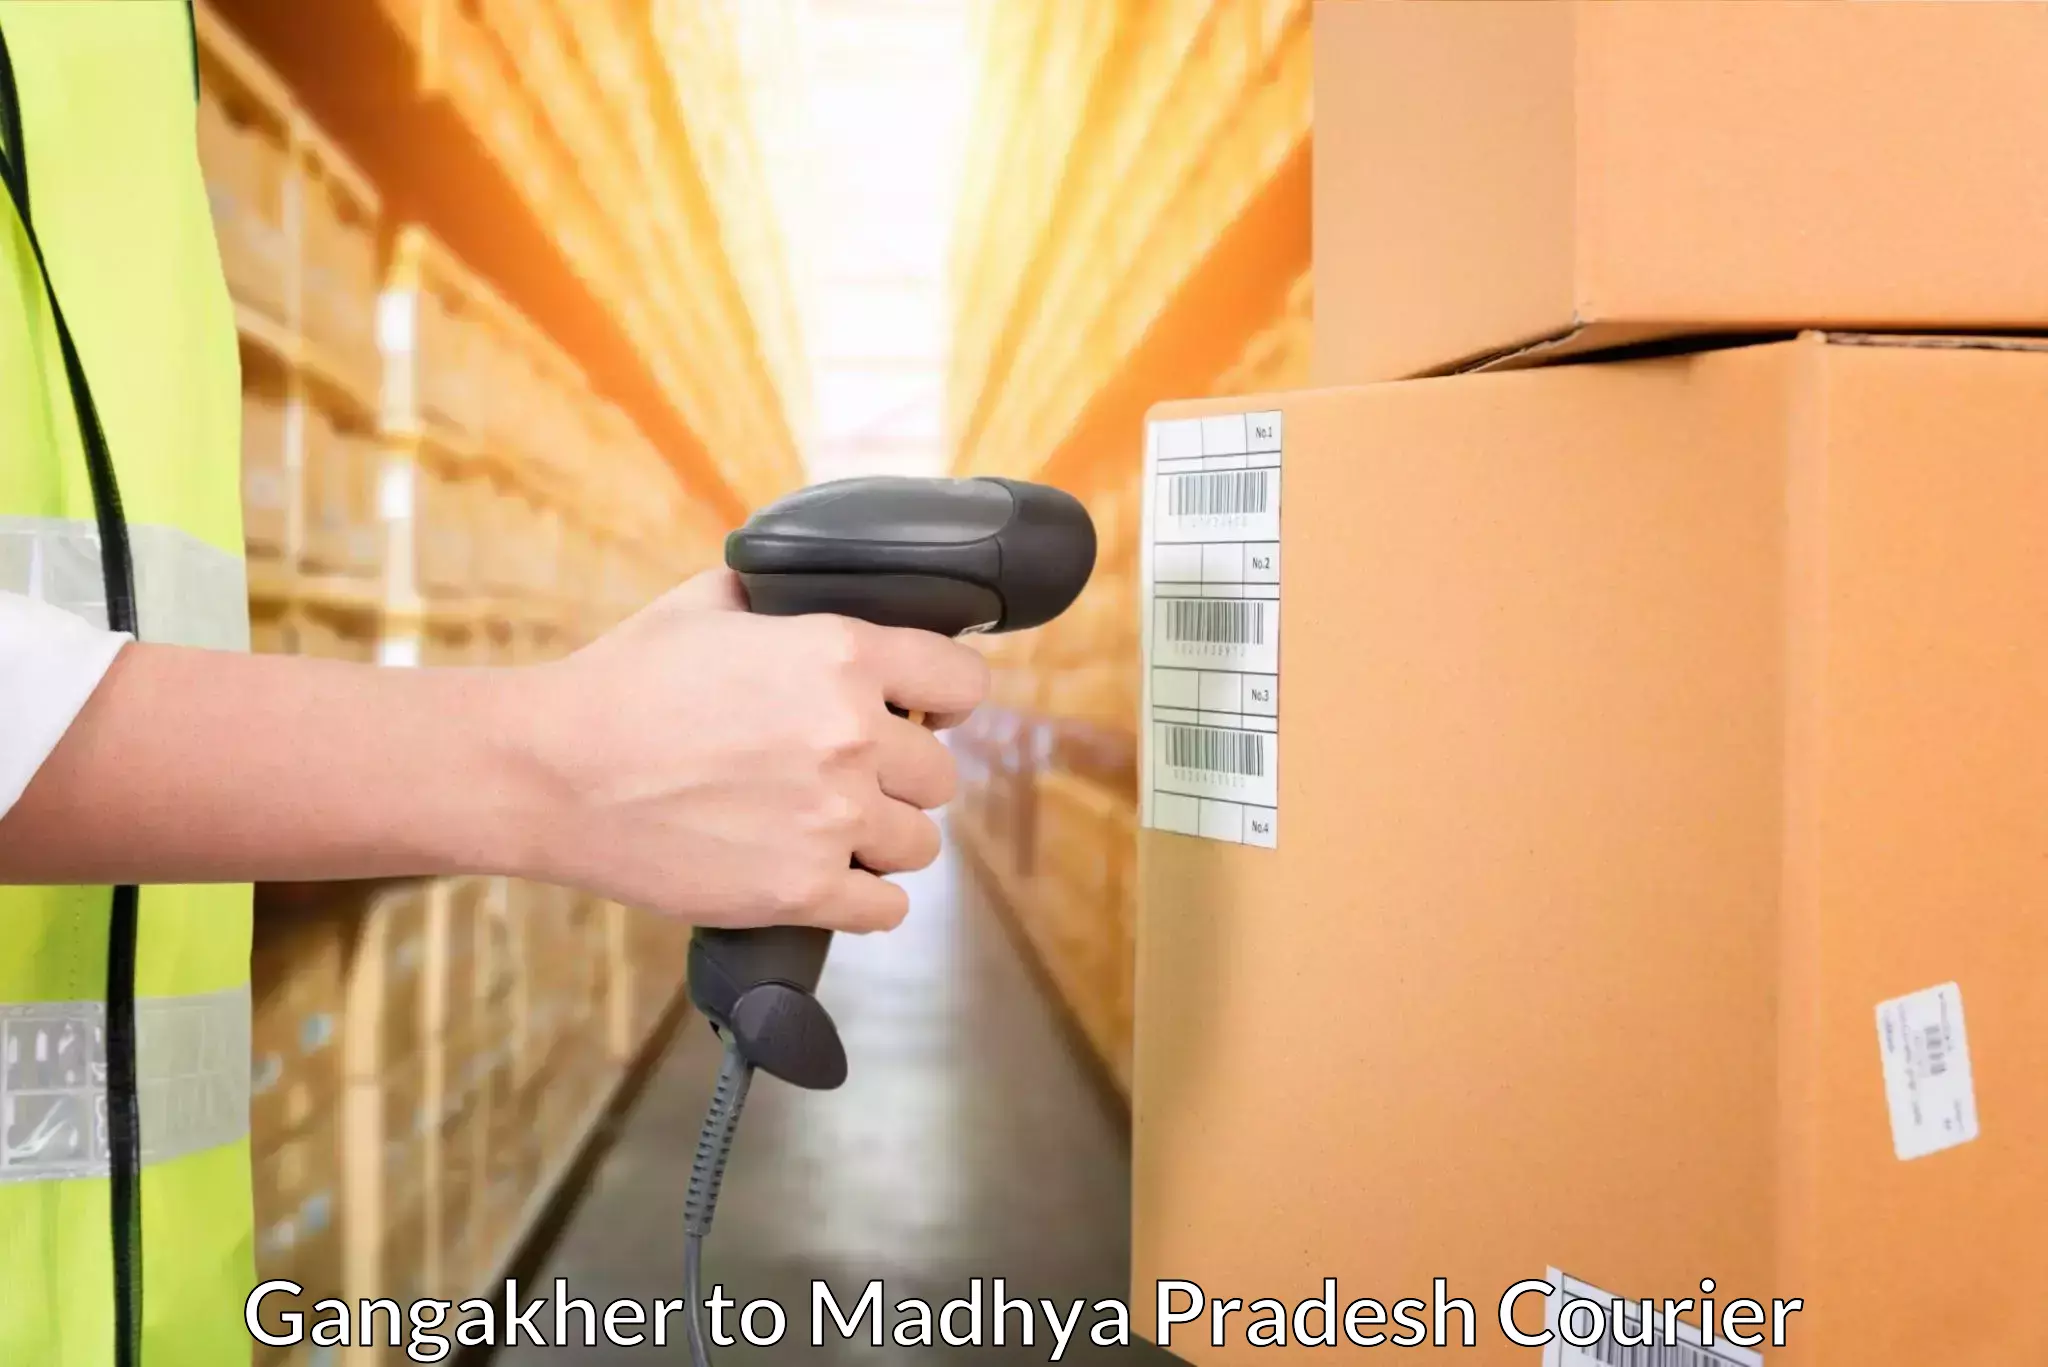 Reliable courier service in Gangakher to Nainpur